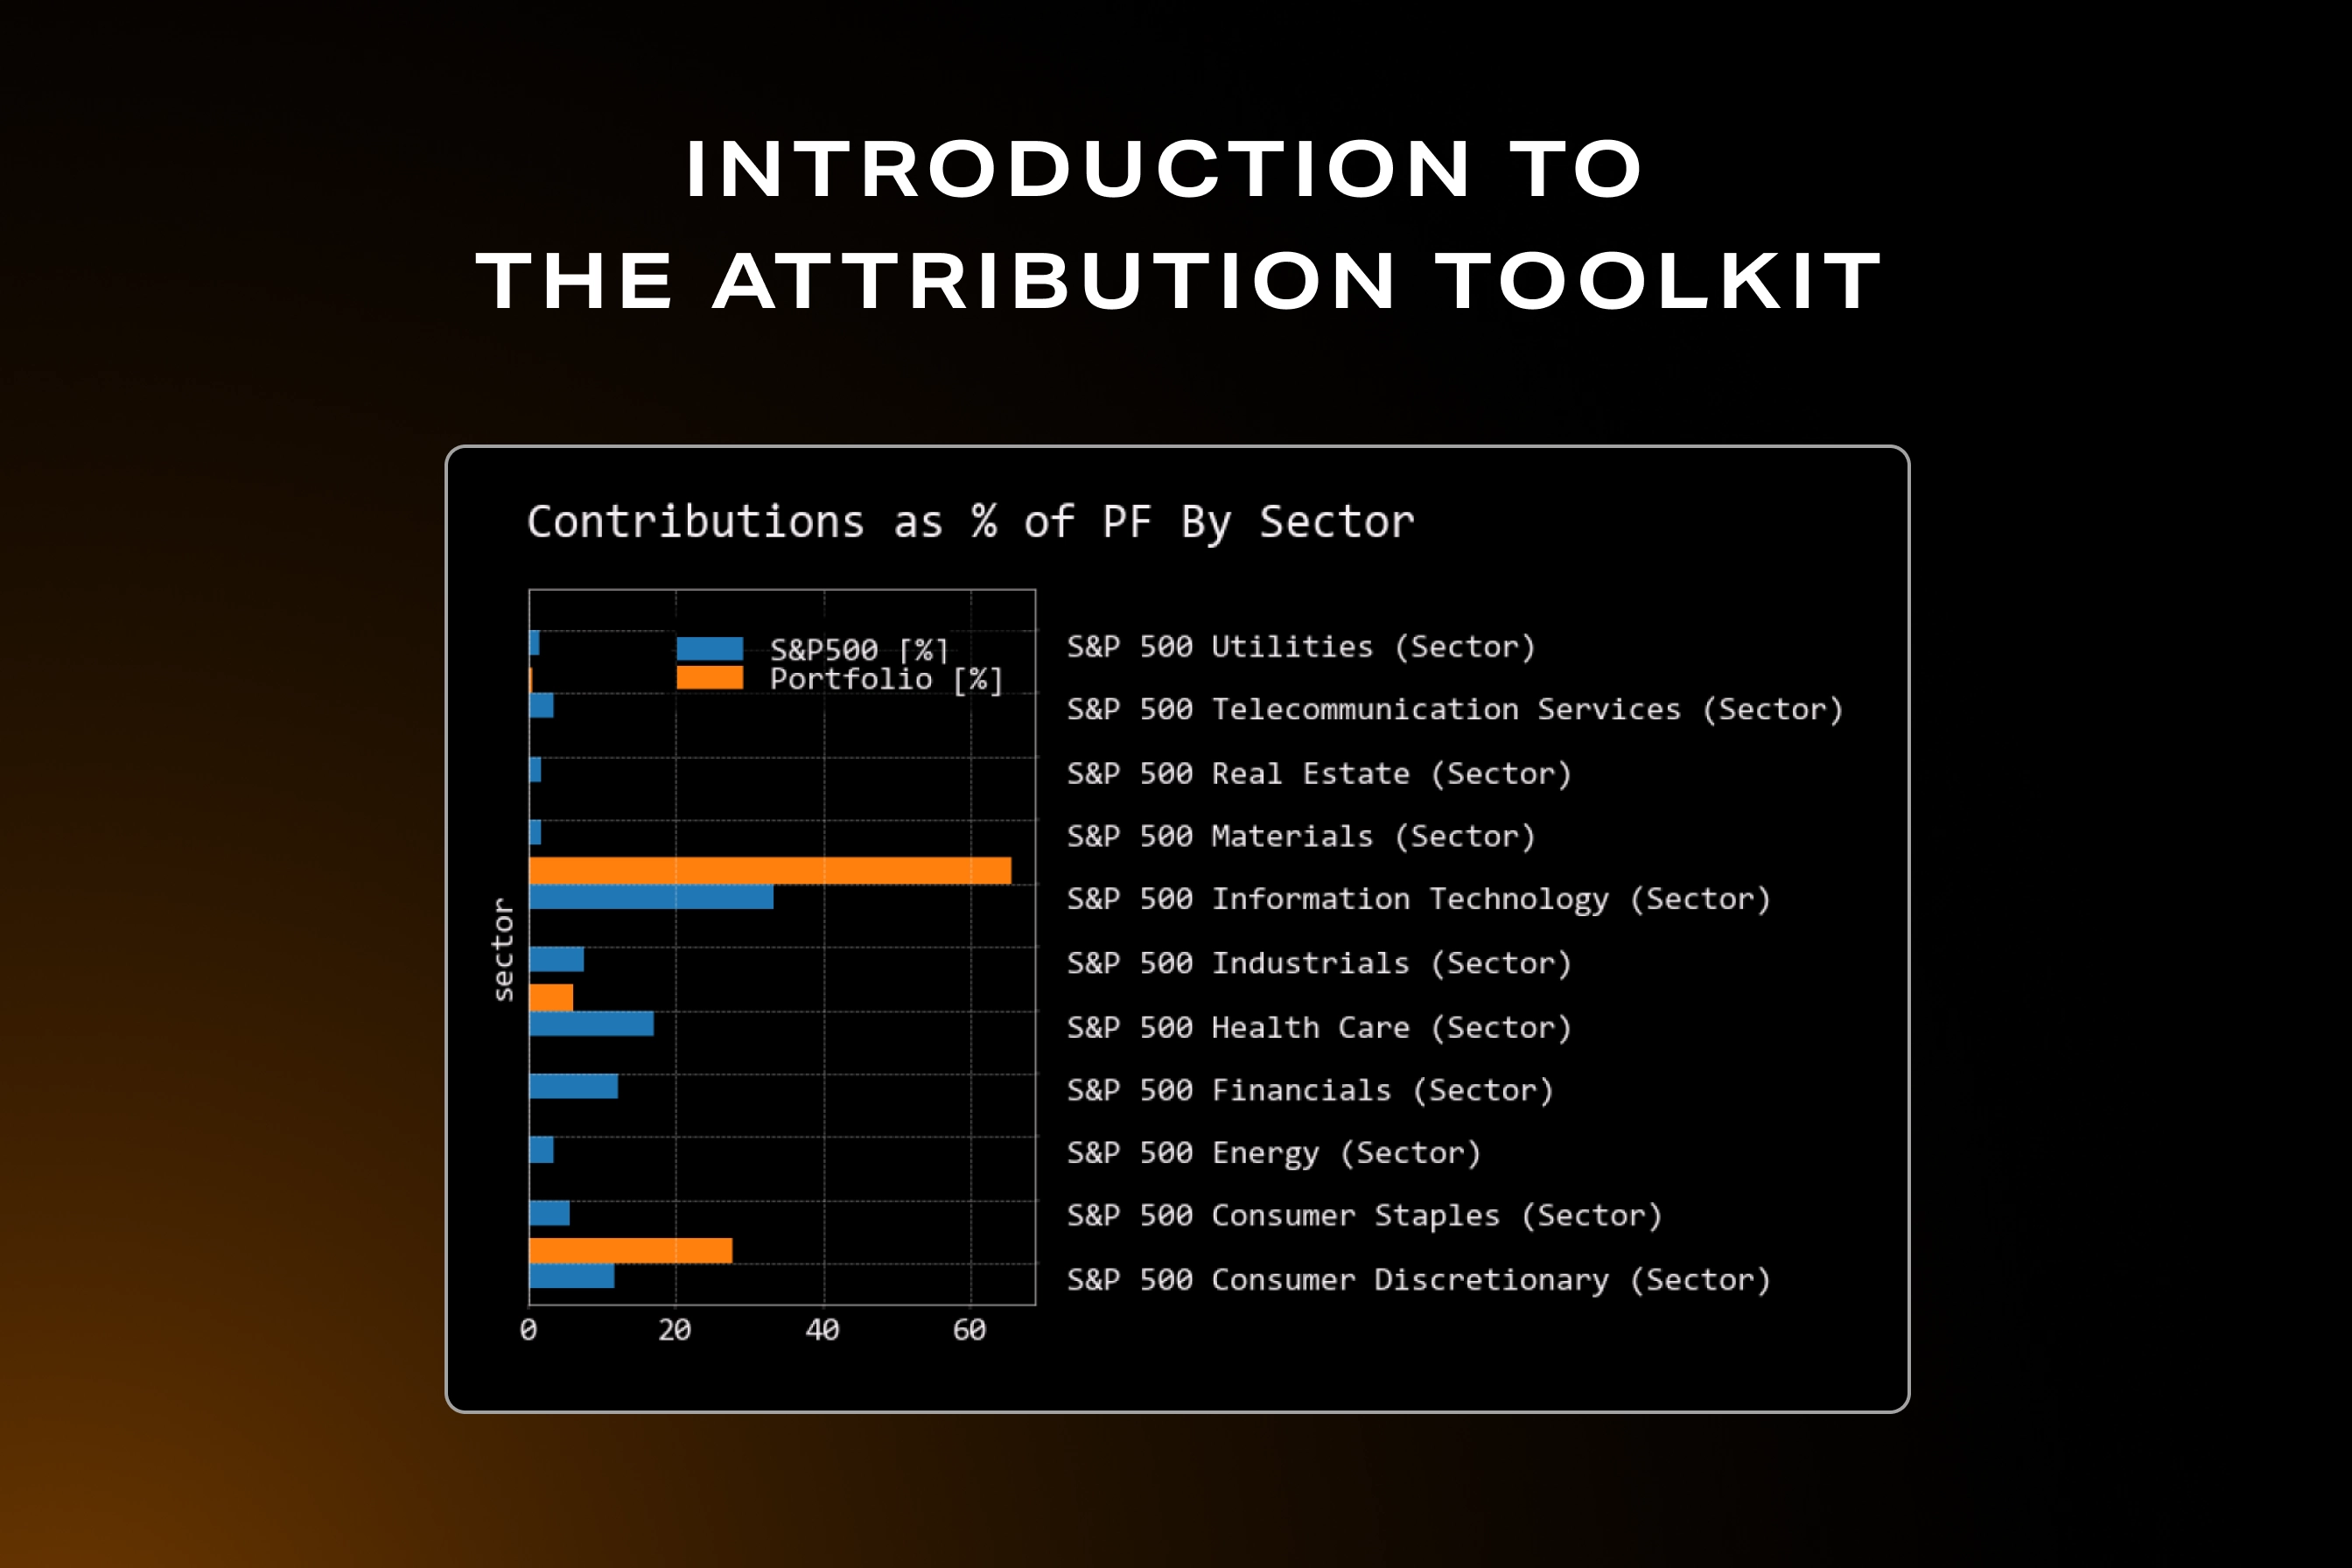 Introduction to the Attribution Toolkit